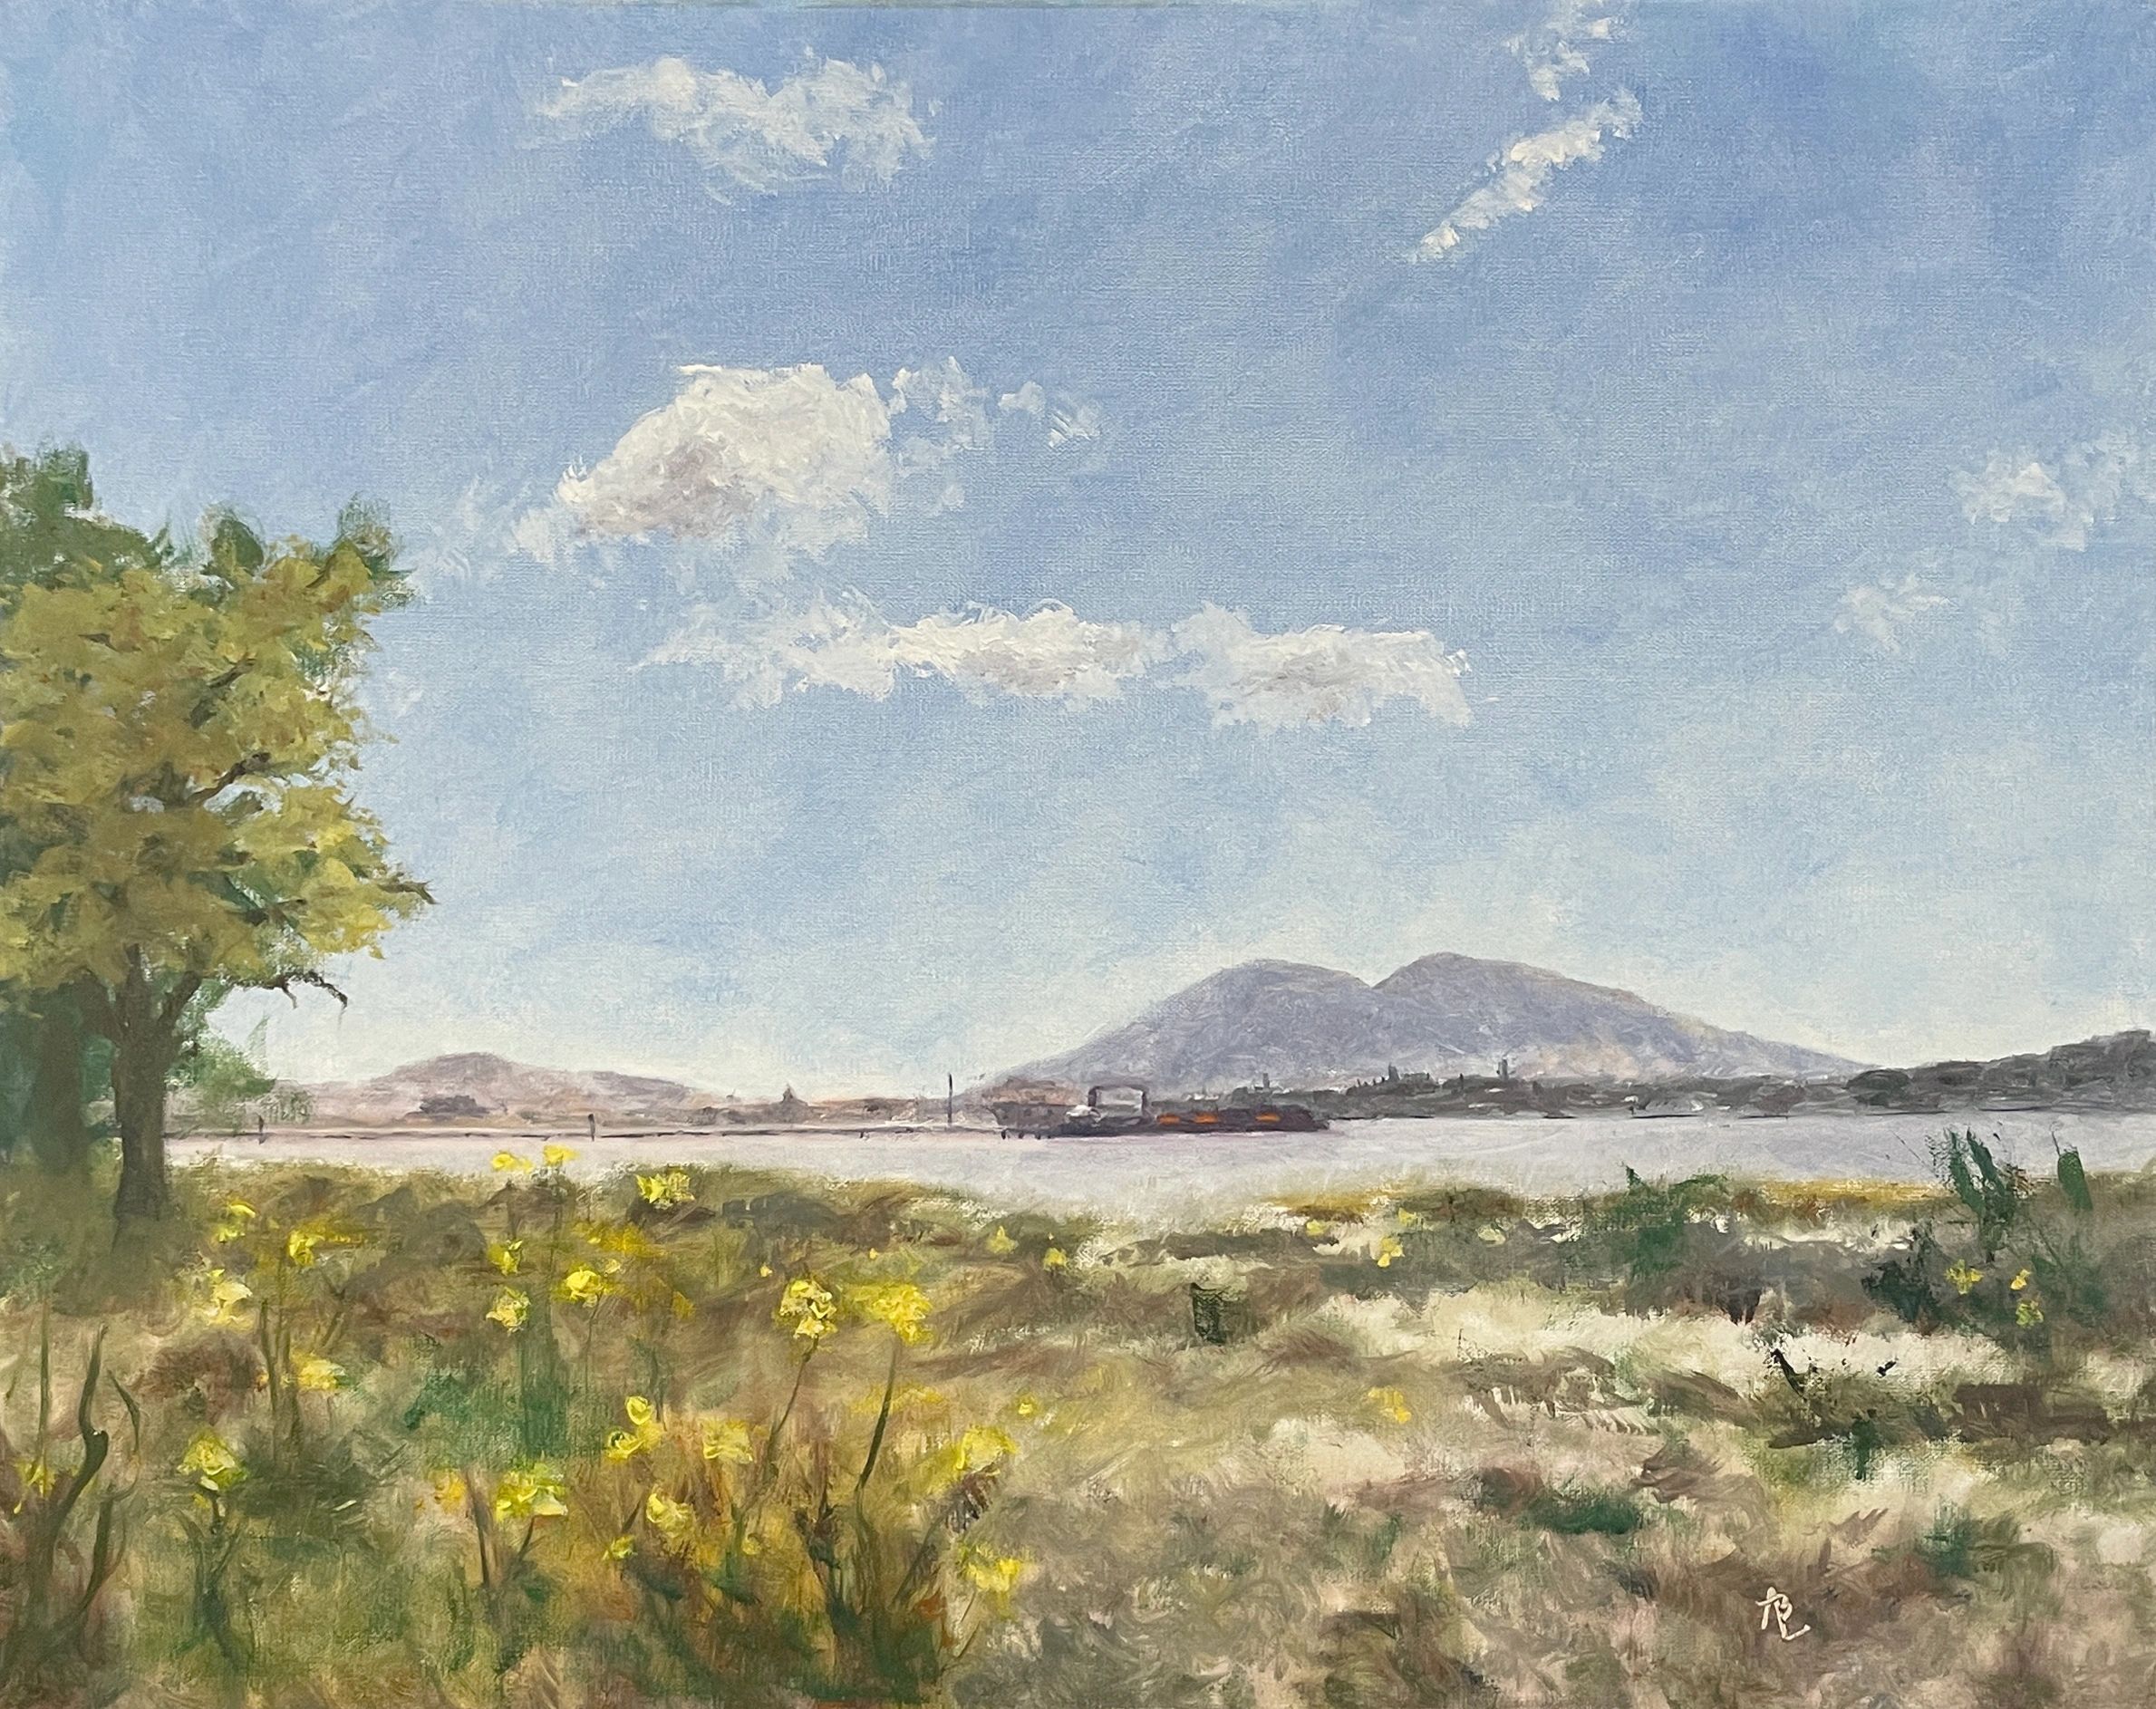 Mt Diablo is seen from marshland flowers & trees across the bay including the old ferry pier.